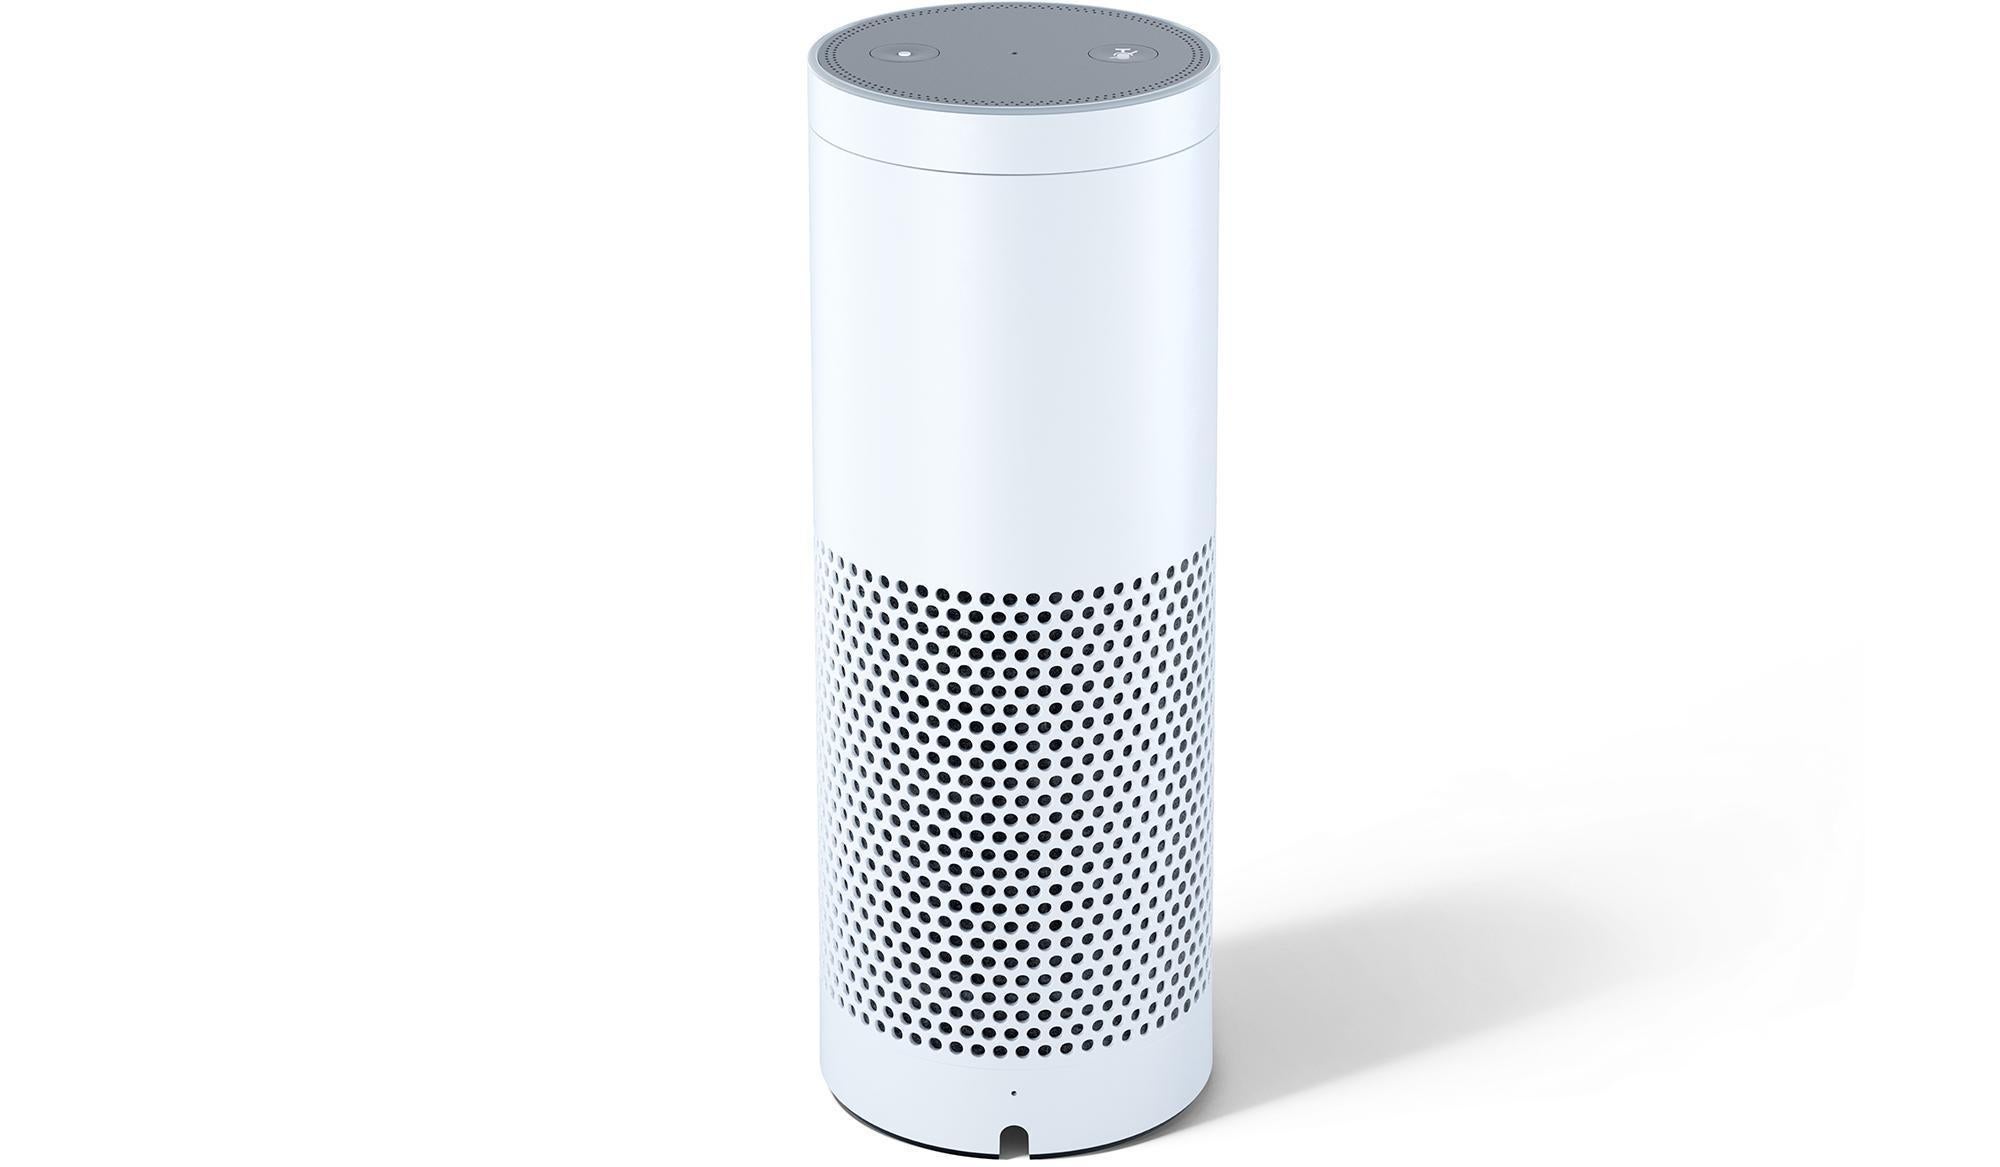 Amazon wants people to hold 20-minute conversations with AI speakers ...